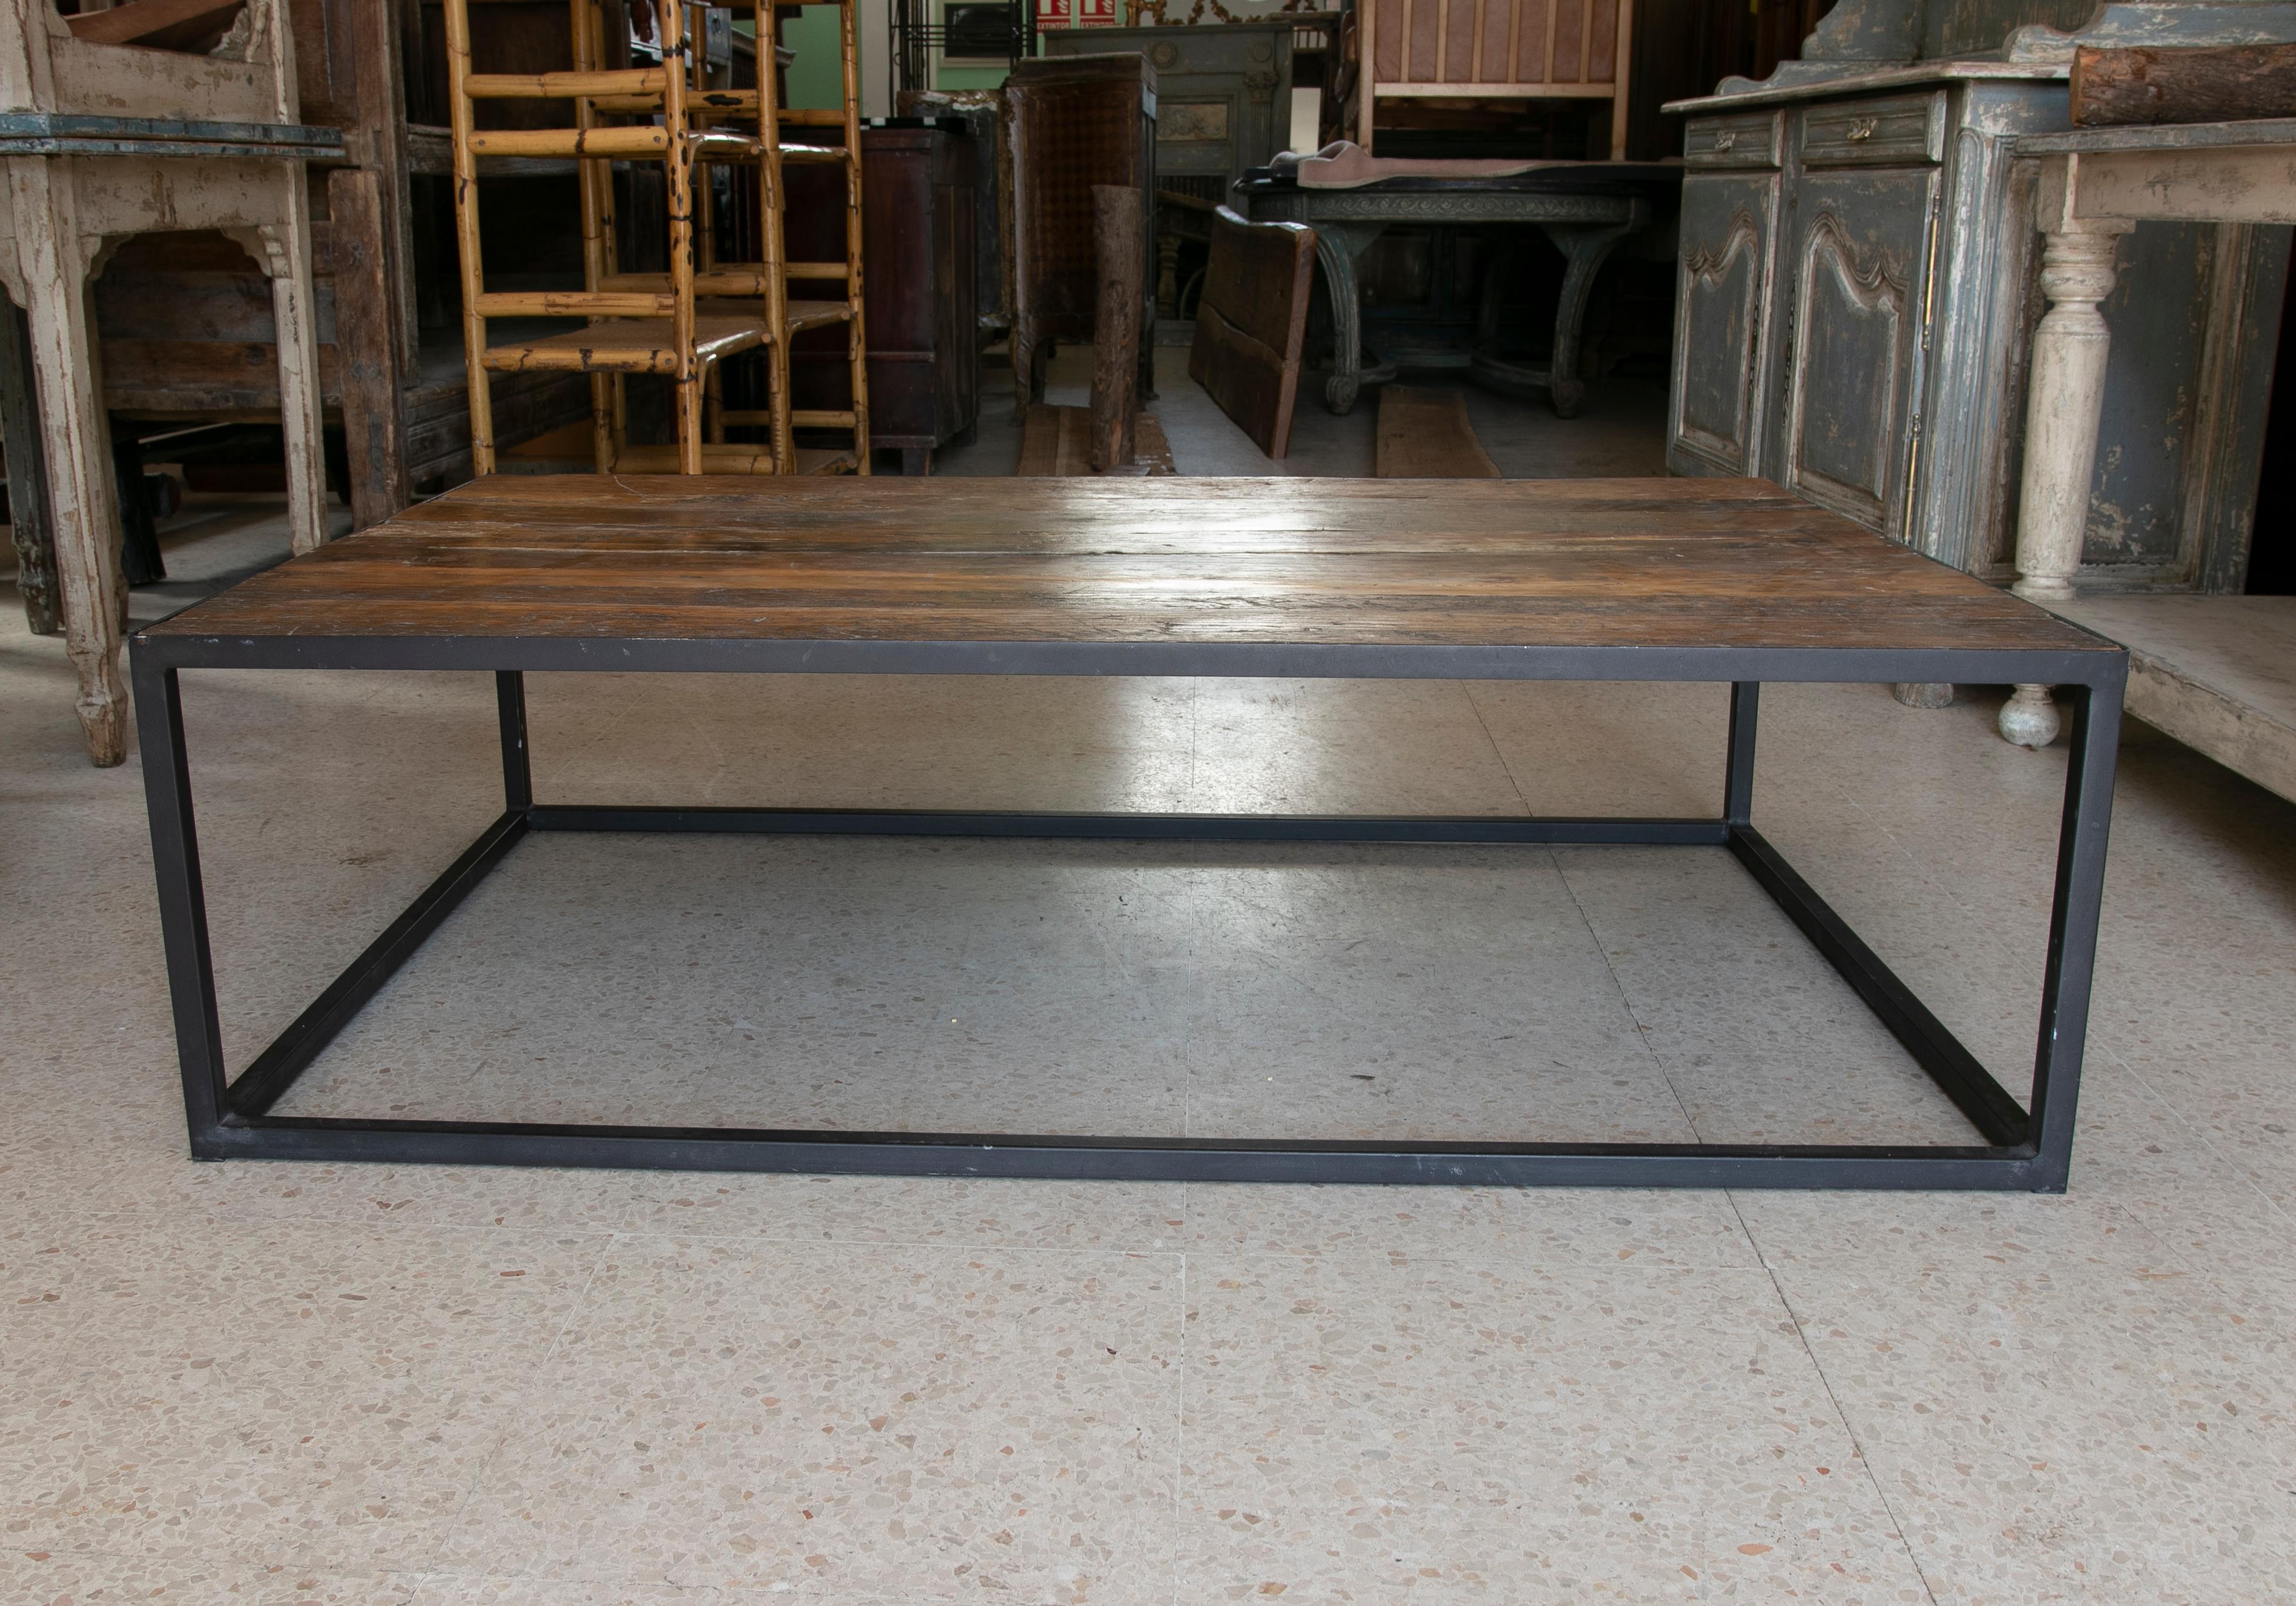 Rustic 1990s Spanish iron cube coffee table with distressed wood top.
    